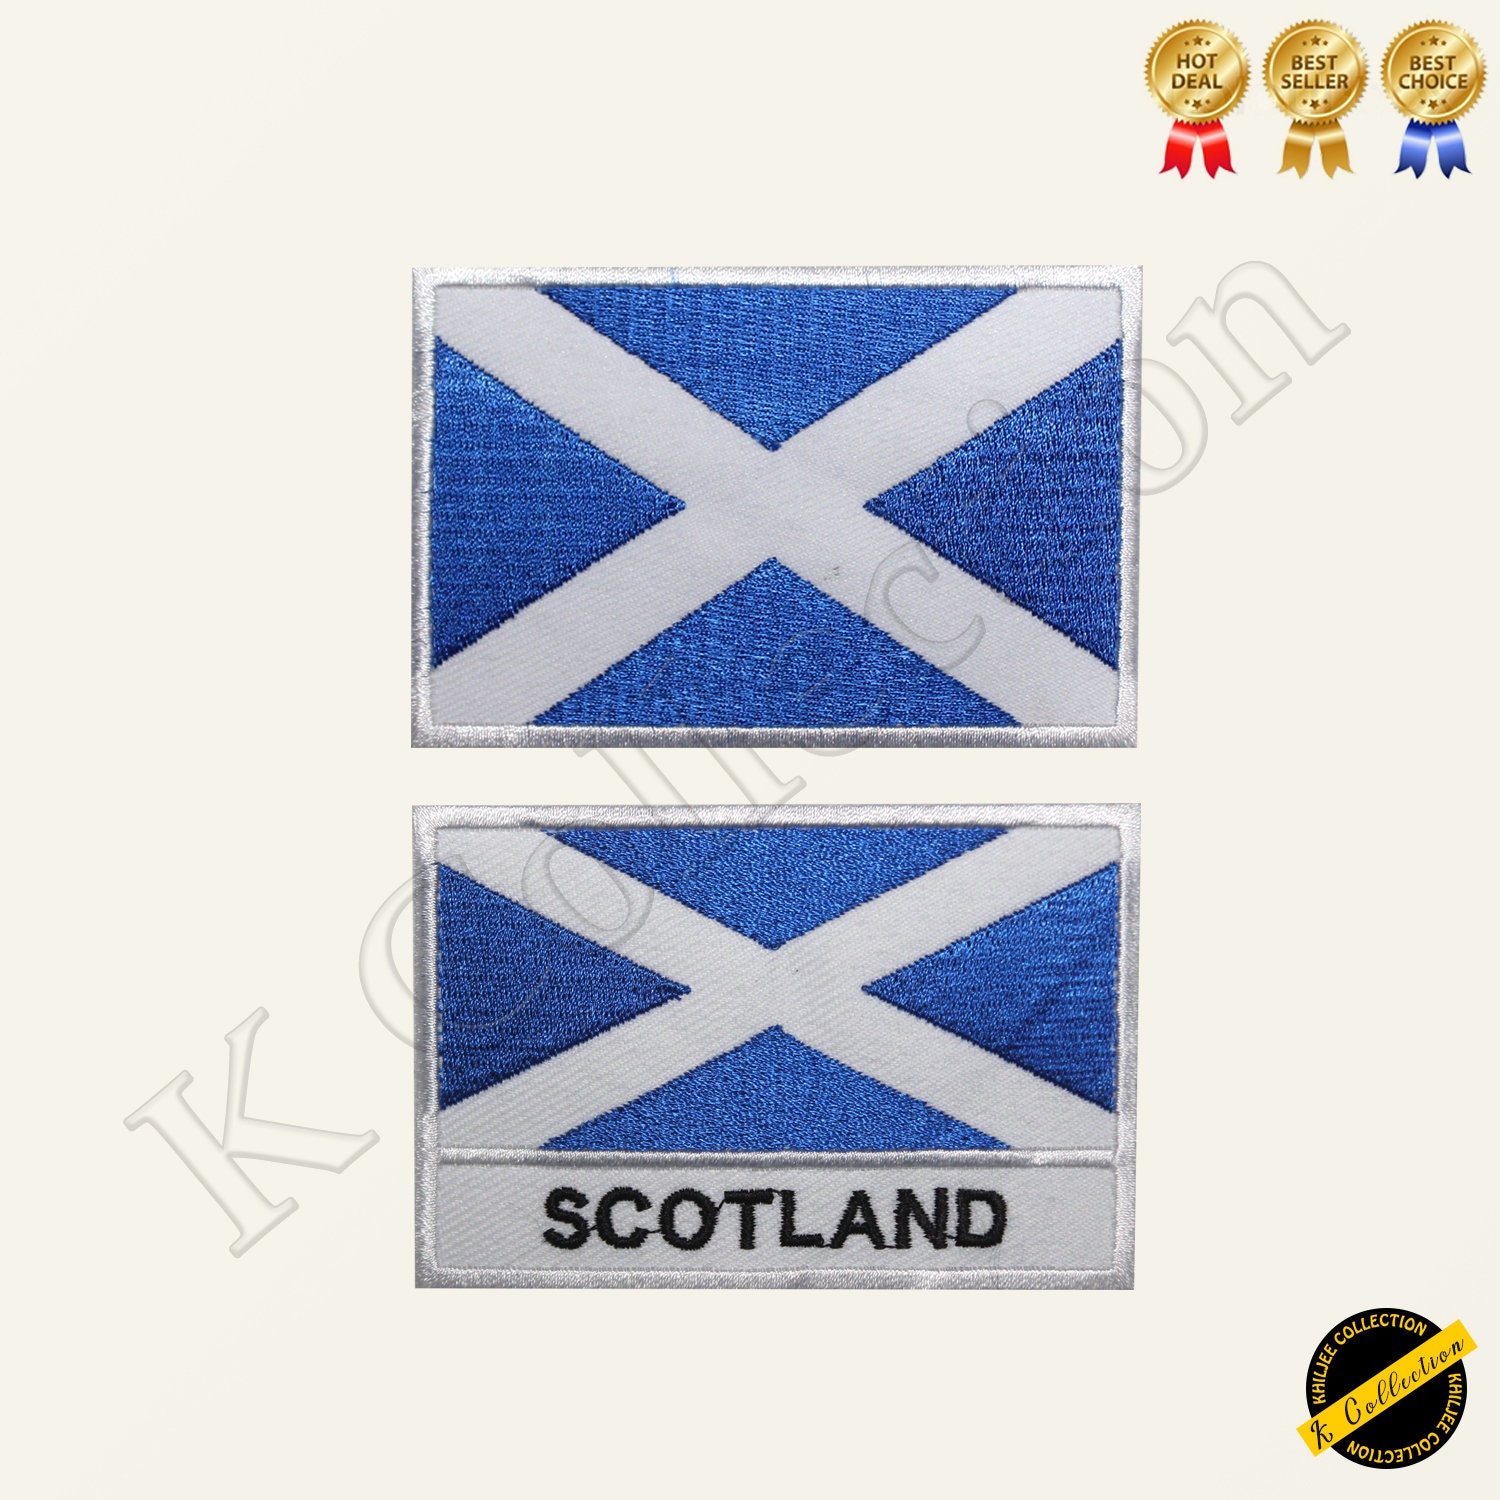 Scotland National Flag Embroidered Iron On Patch Sew On Badge 